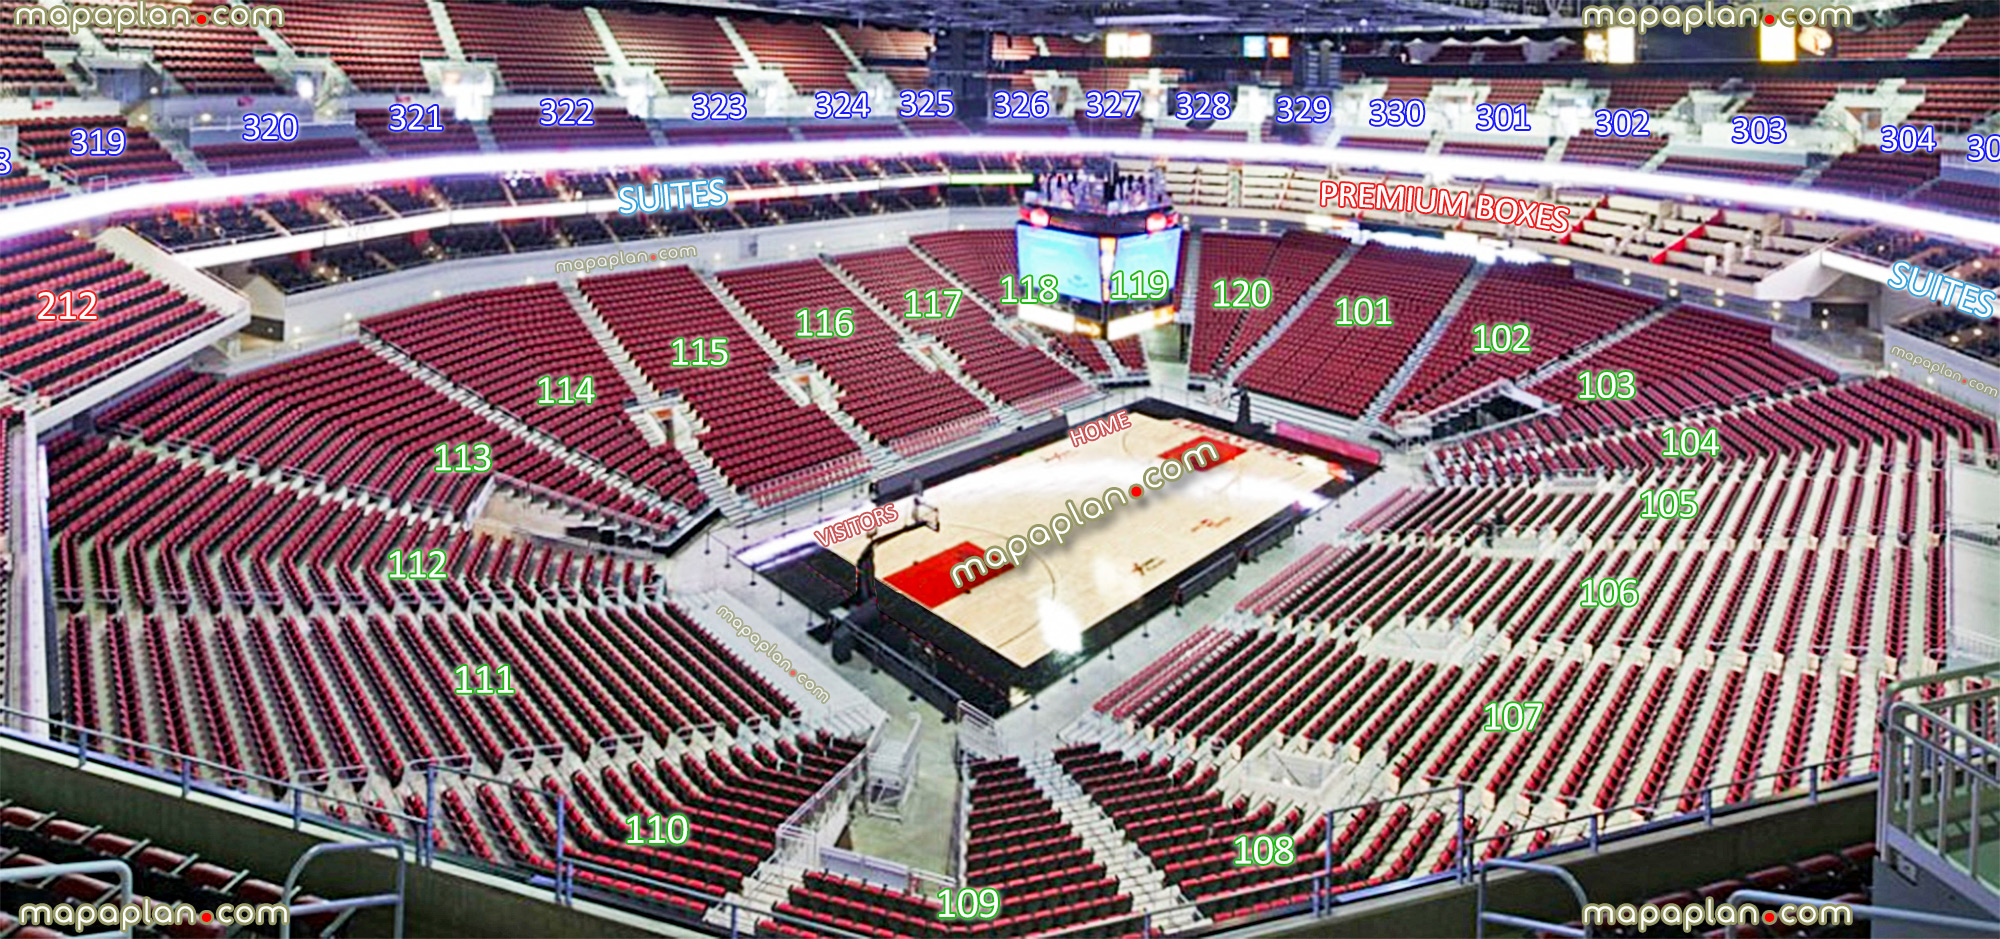 view section 312 row f seat 5 university louisville u of l cardinals ncaa college basketball tournament panorama home team visitors benches courtside sideline court baseline corner sections Louisville KFC Yum! Center seating chart